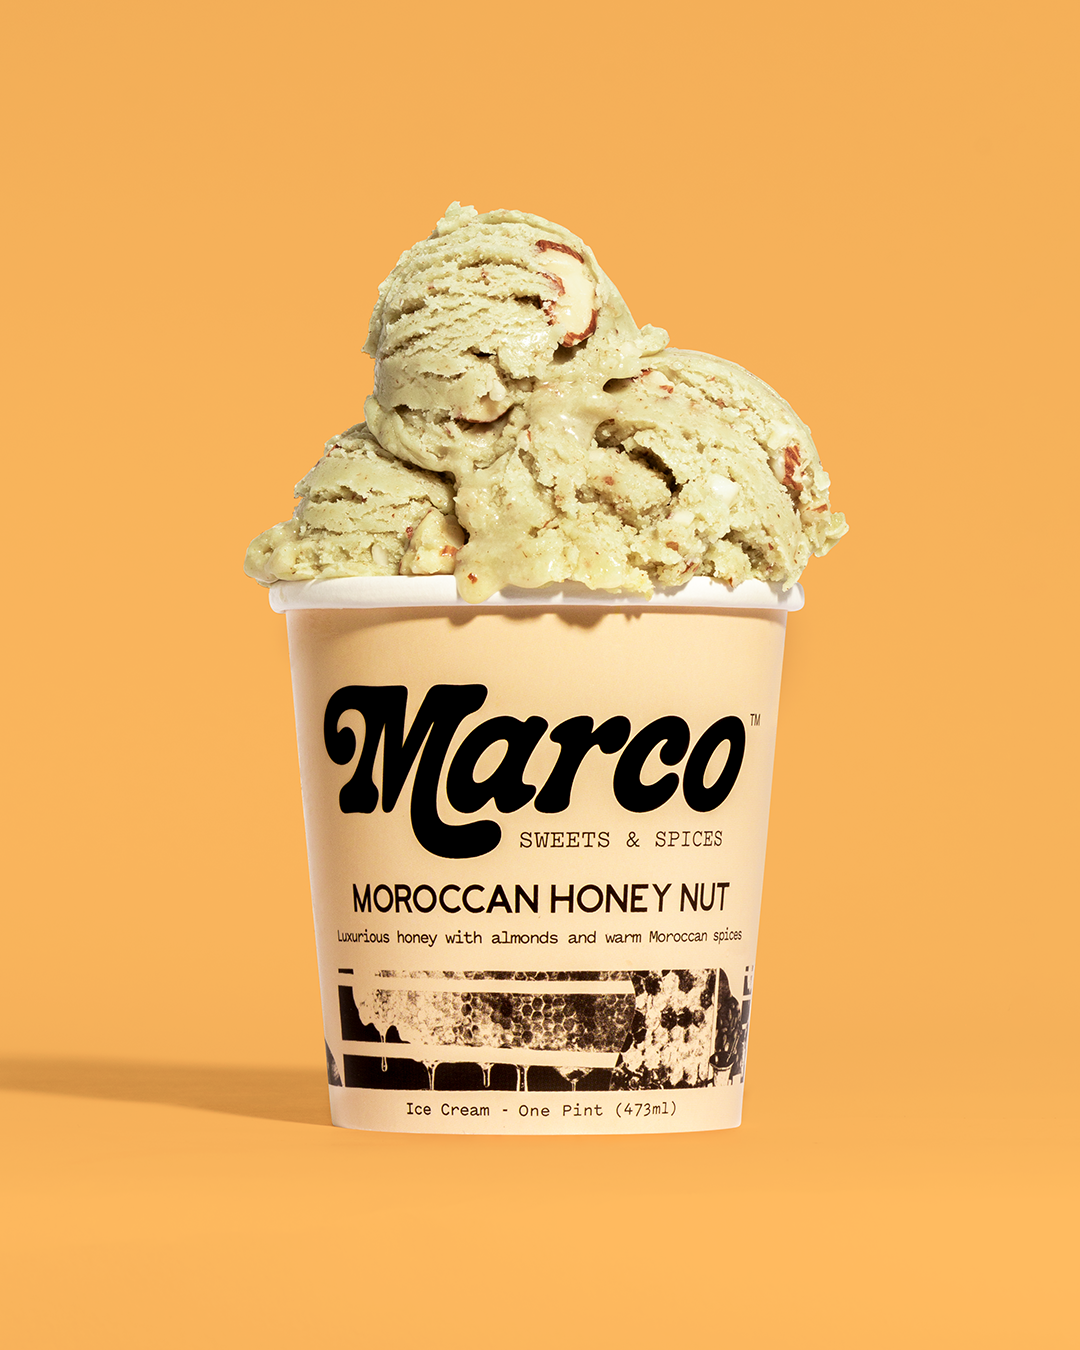 Moroccan Honey Nut - Ice Cream – Marco Sweets & Spices